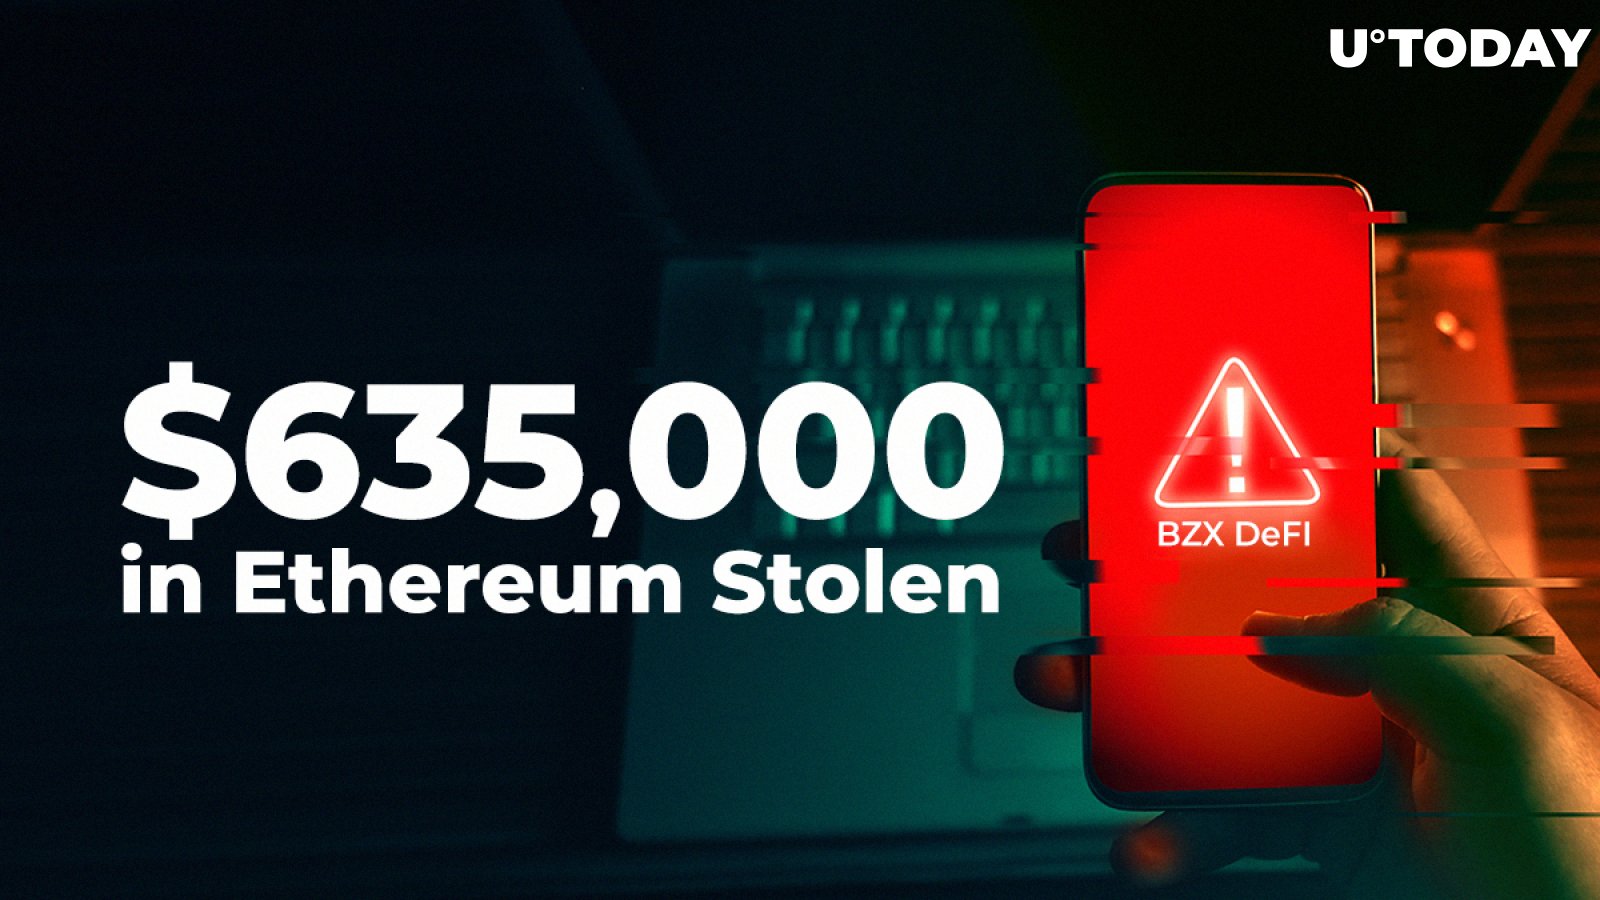 Crypto Hacker Hits BZX DeFi App Again Stealing $635,000 in Ethereum (ETH)